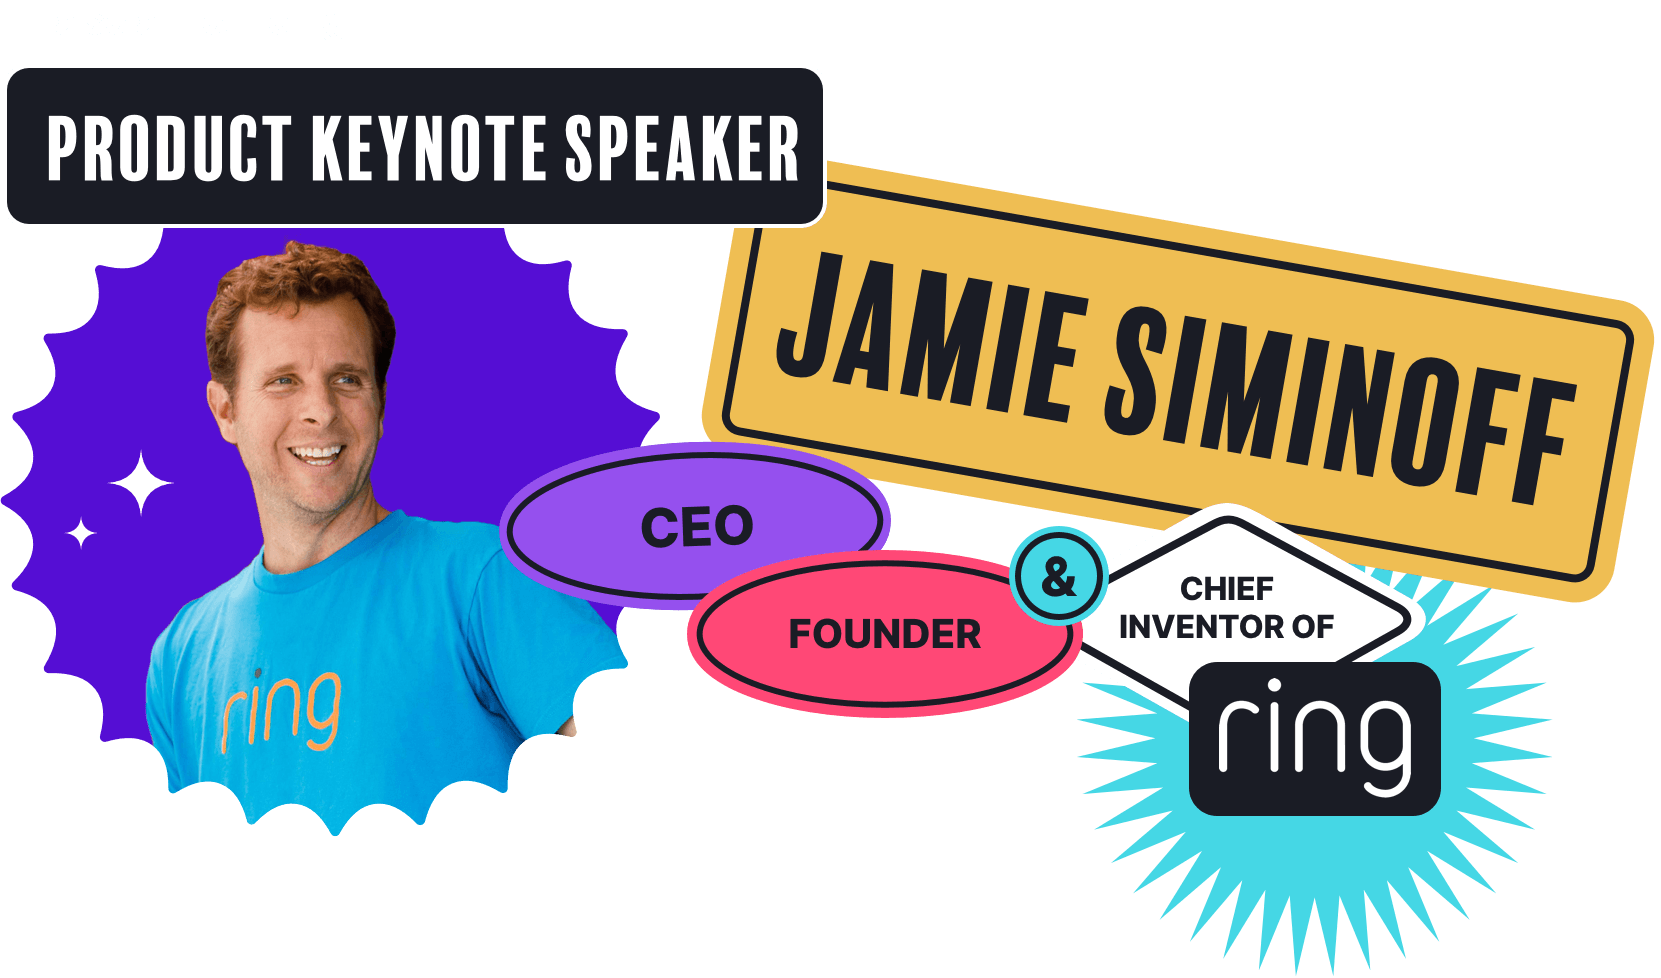 Keynote - Jamie Siminoff CEO, Founder and Chief Inventor of Ring